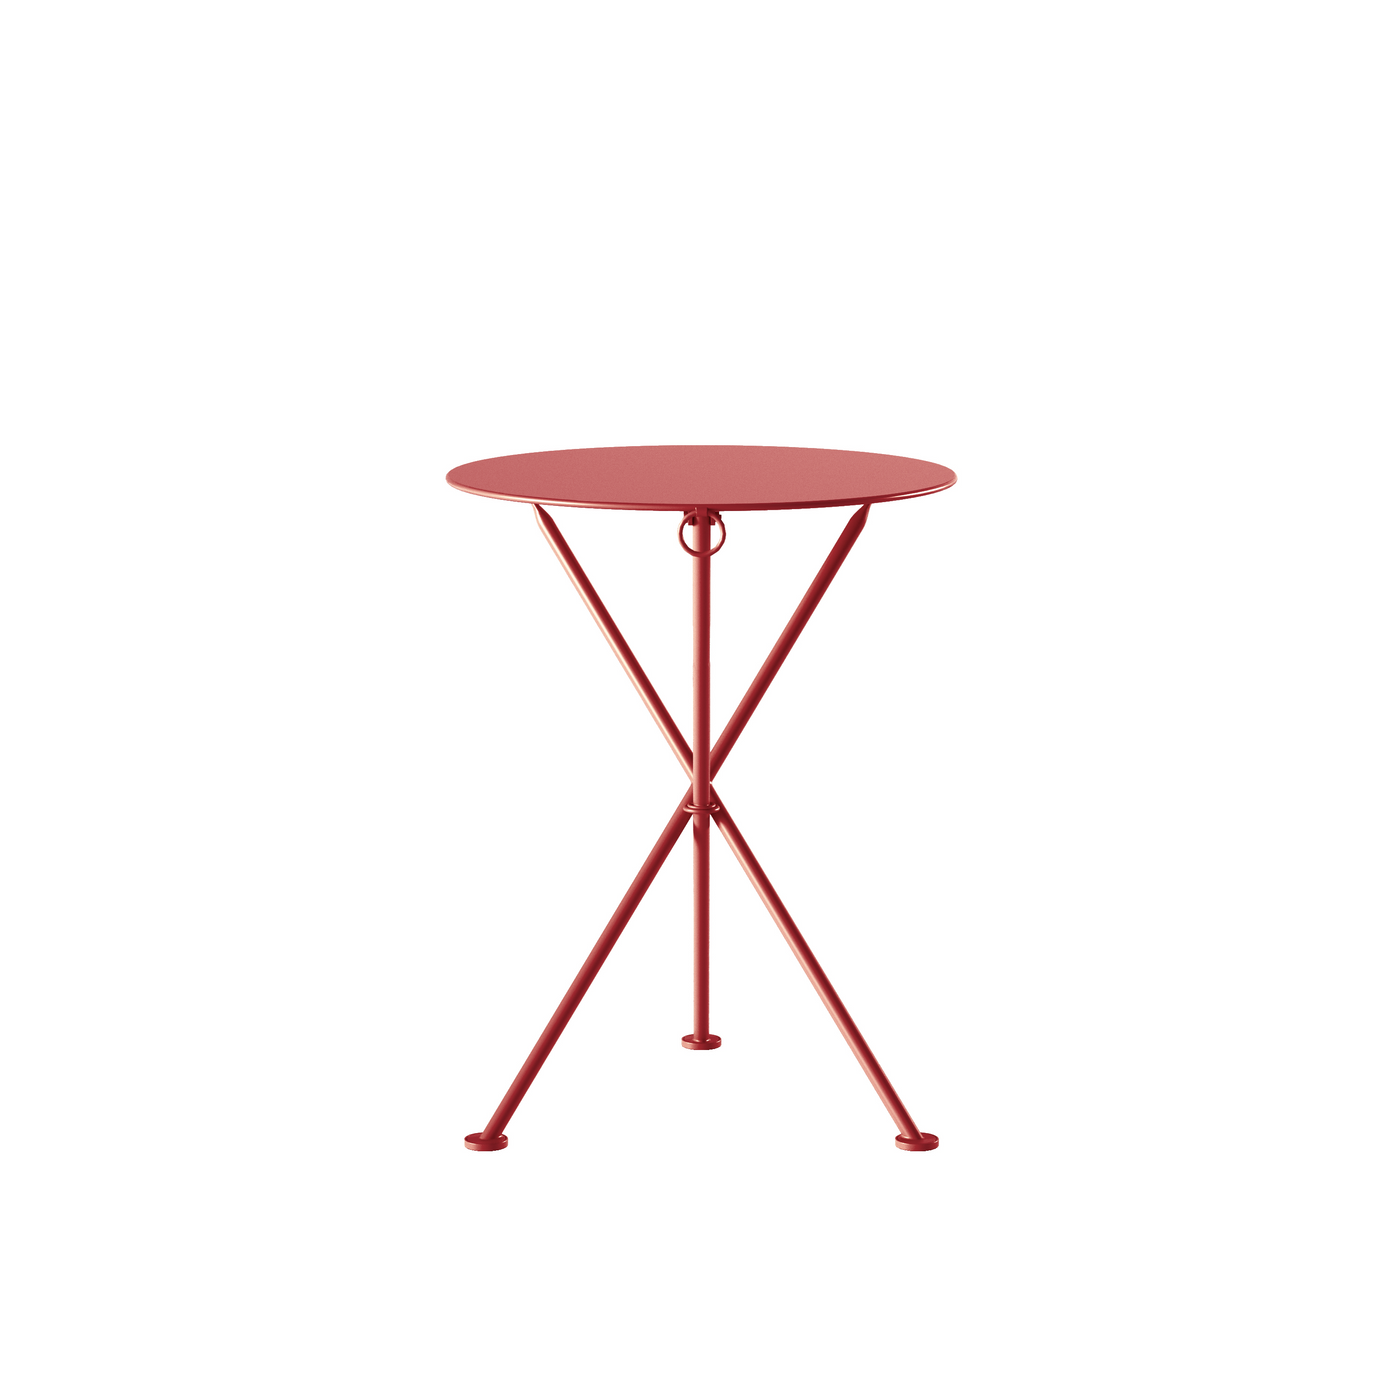 Bistro Metal Foldable Garden Table and Chair Set, Berry Red